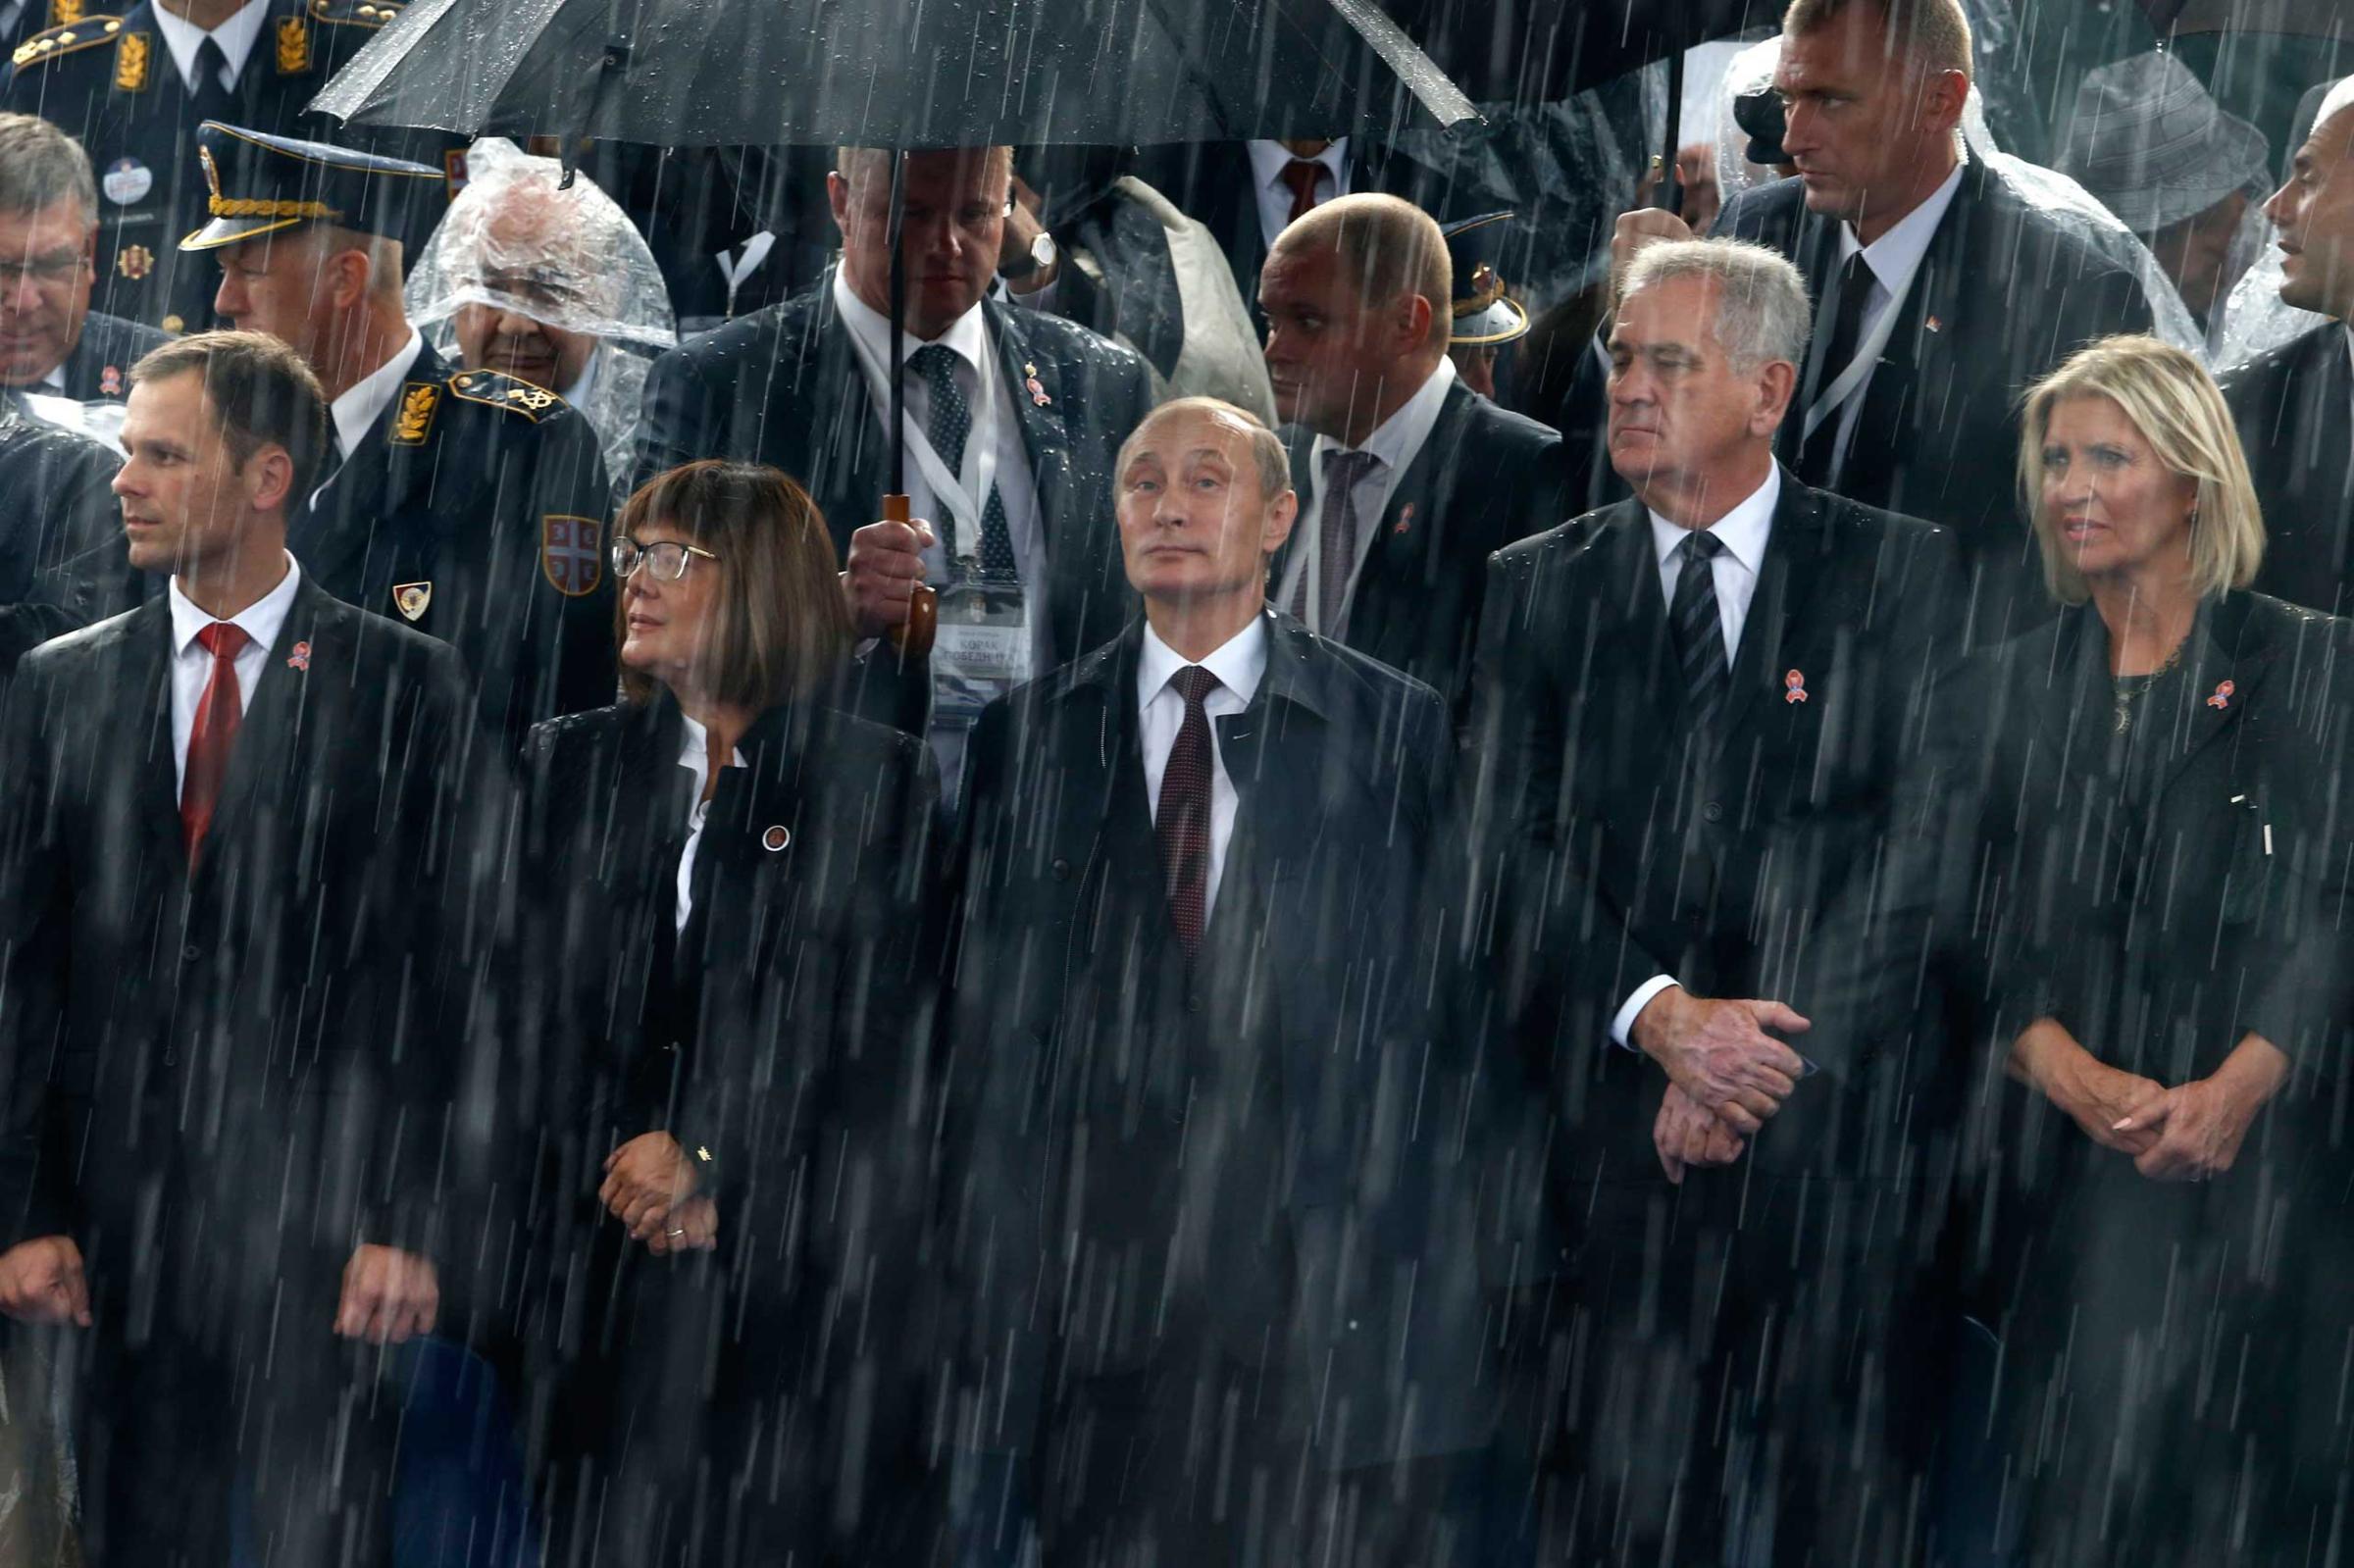 Russian President, and his Serbian counterpart, Tomislav Nikolic, attend a military parade in Belgrade on Oct. 16 to mark the 70th anniversary of the city’s liberation from Nazi occupation